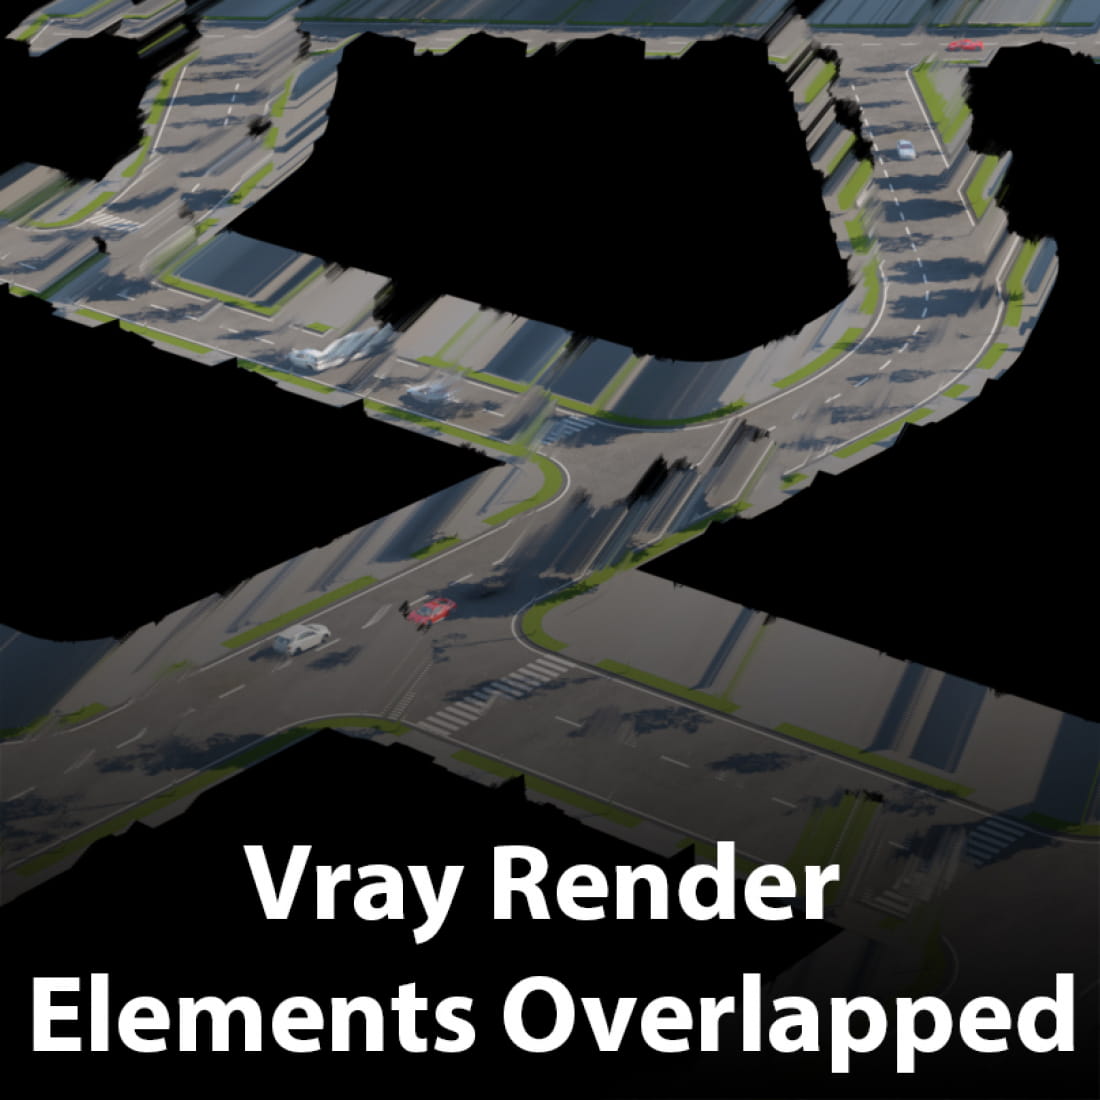 vray-render-elements-overlapped-how-to-fix-it-